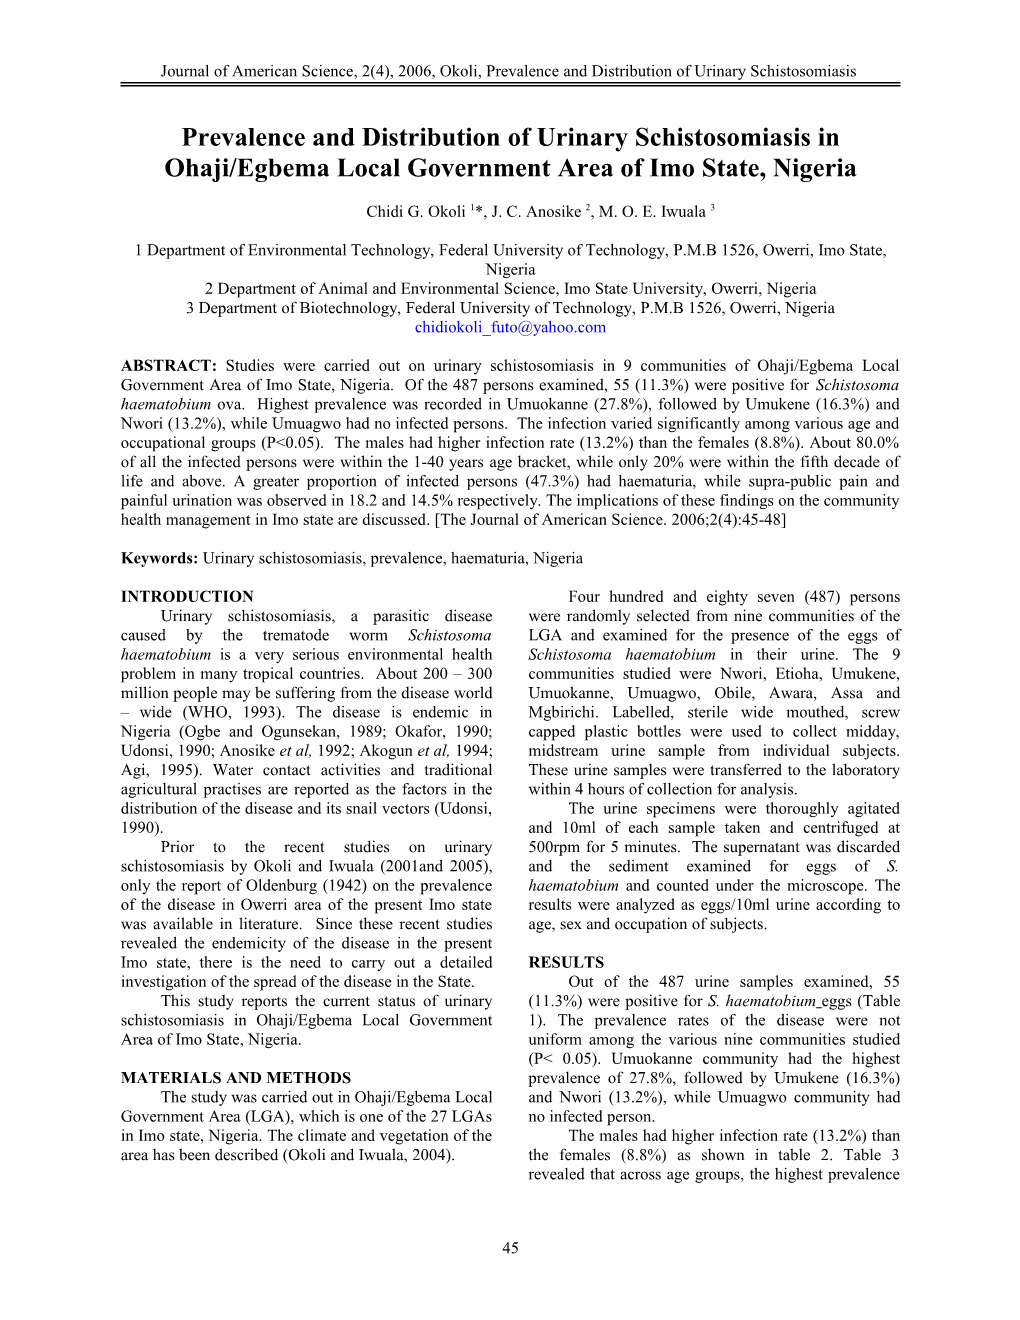 Prevalence and Distribution of Urinary Schistosomiasis in Ohaji/Egbema Local Government